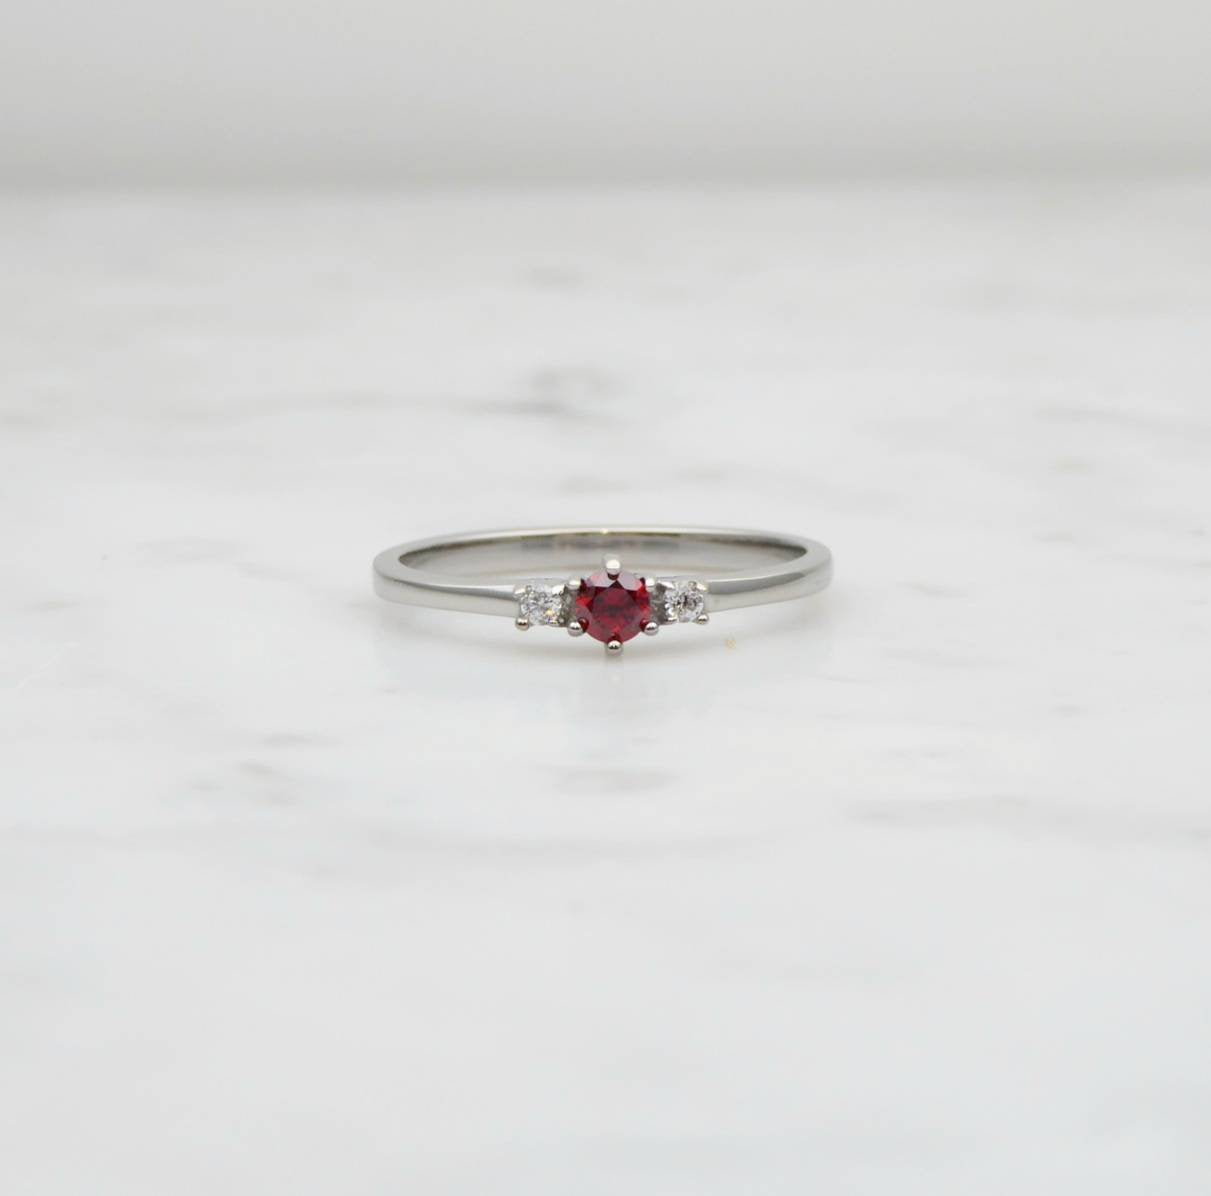 Natural Garnet and White Sapphire 3 stone Trilogy Ring in White Gold or Titanium  - engagement ring - handmade ring